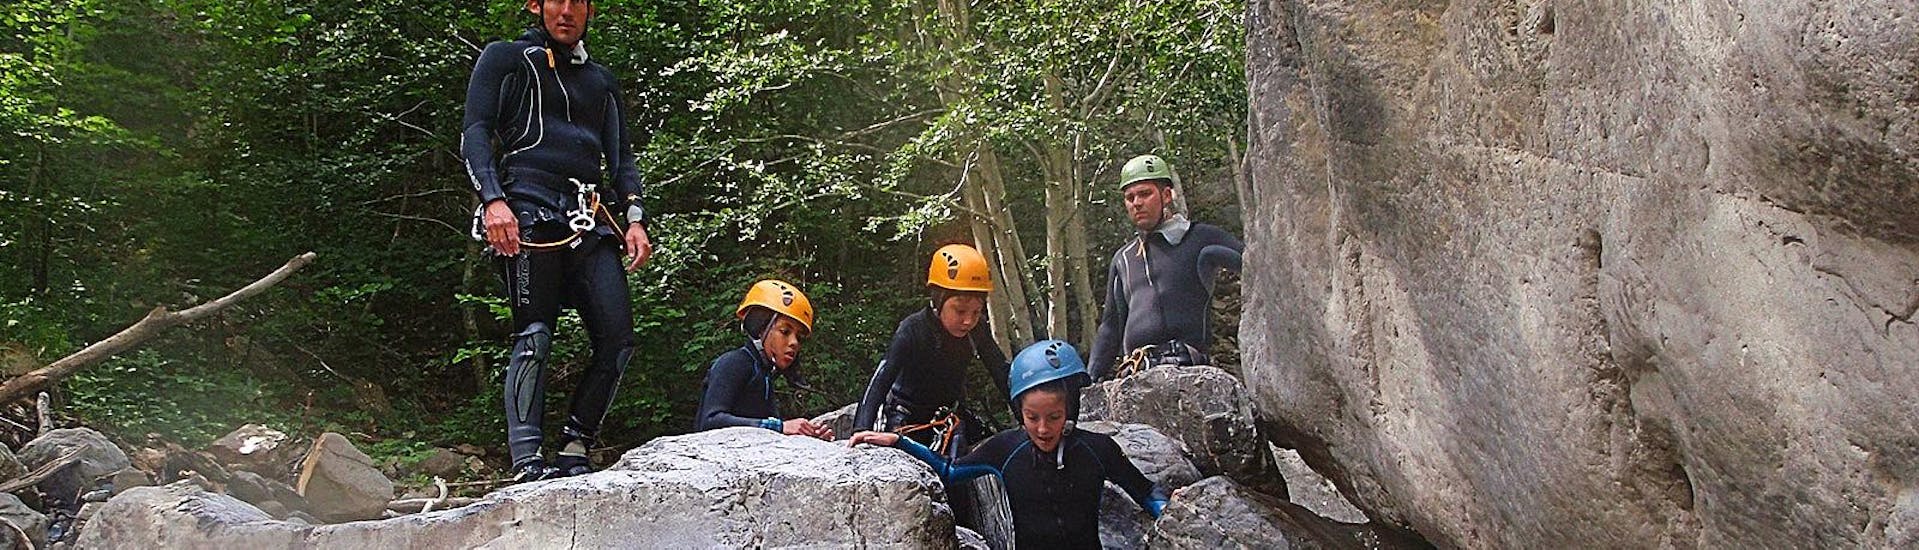 A small group of people is starting the Canyoning activity in the Fournel Canyon with Eaurigine.